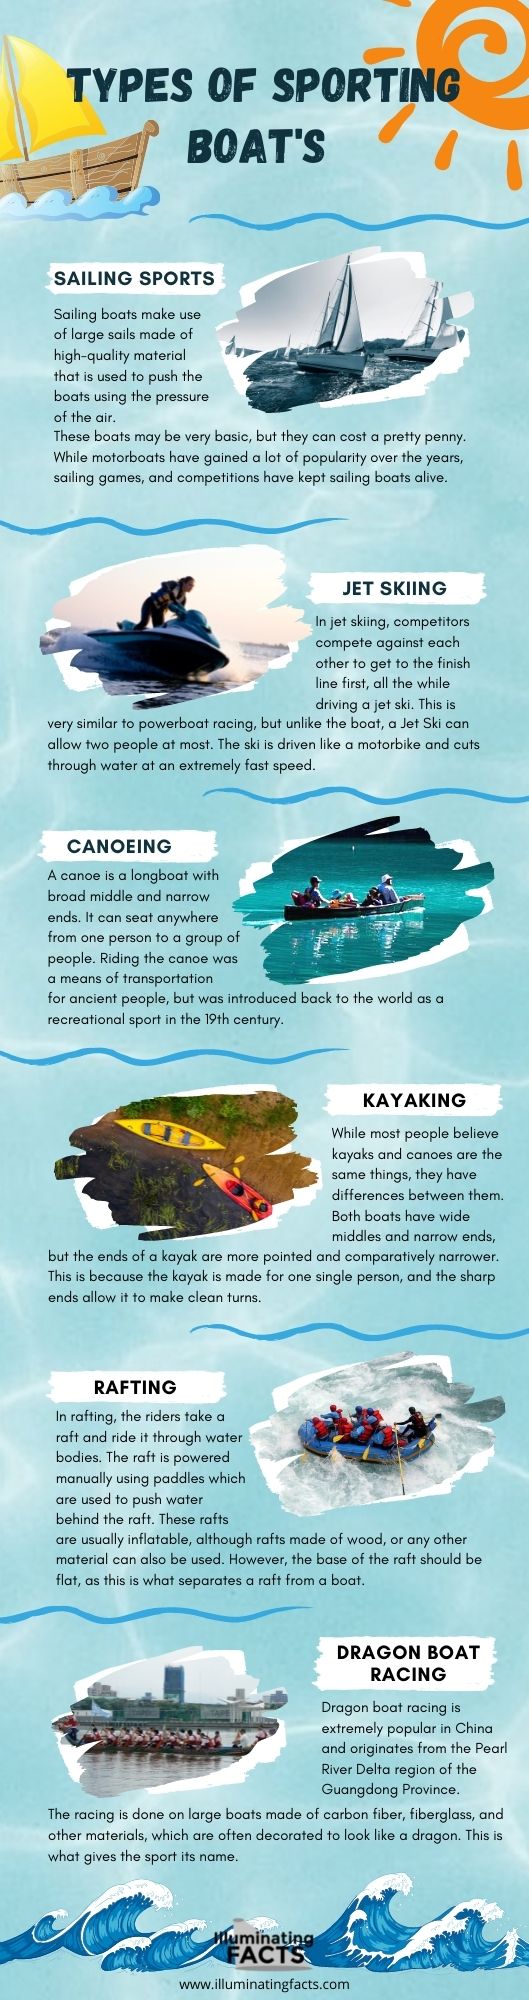 Types of Sporting Boats